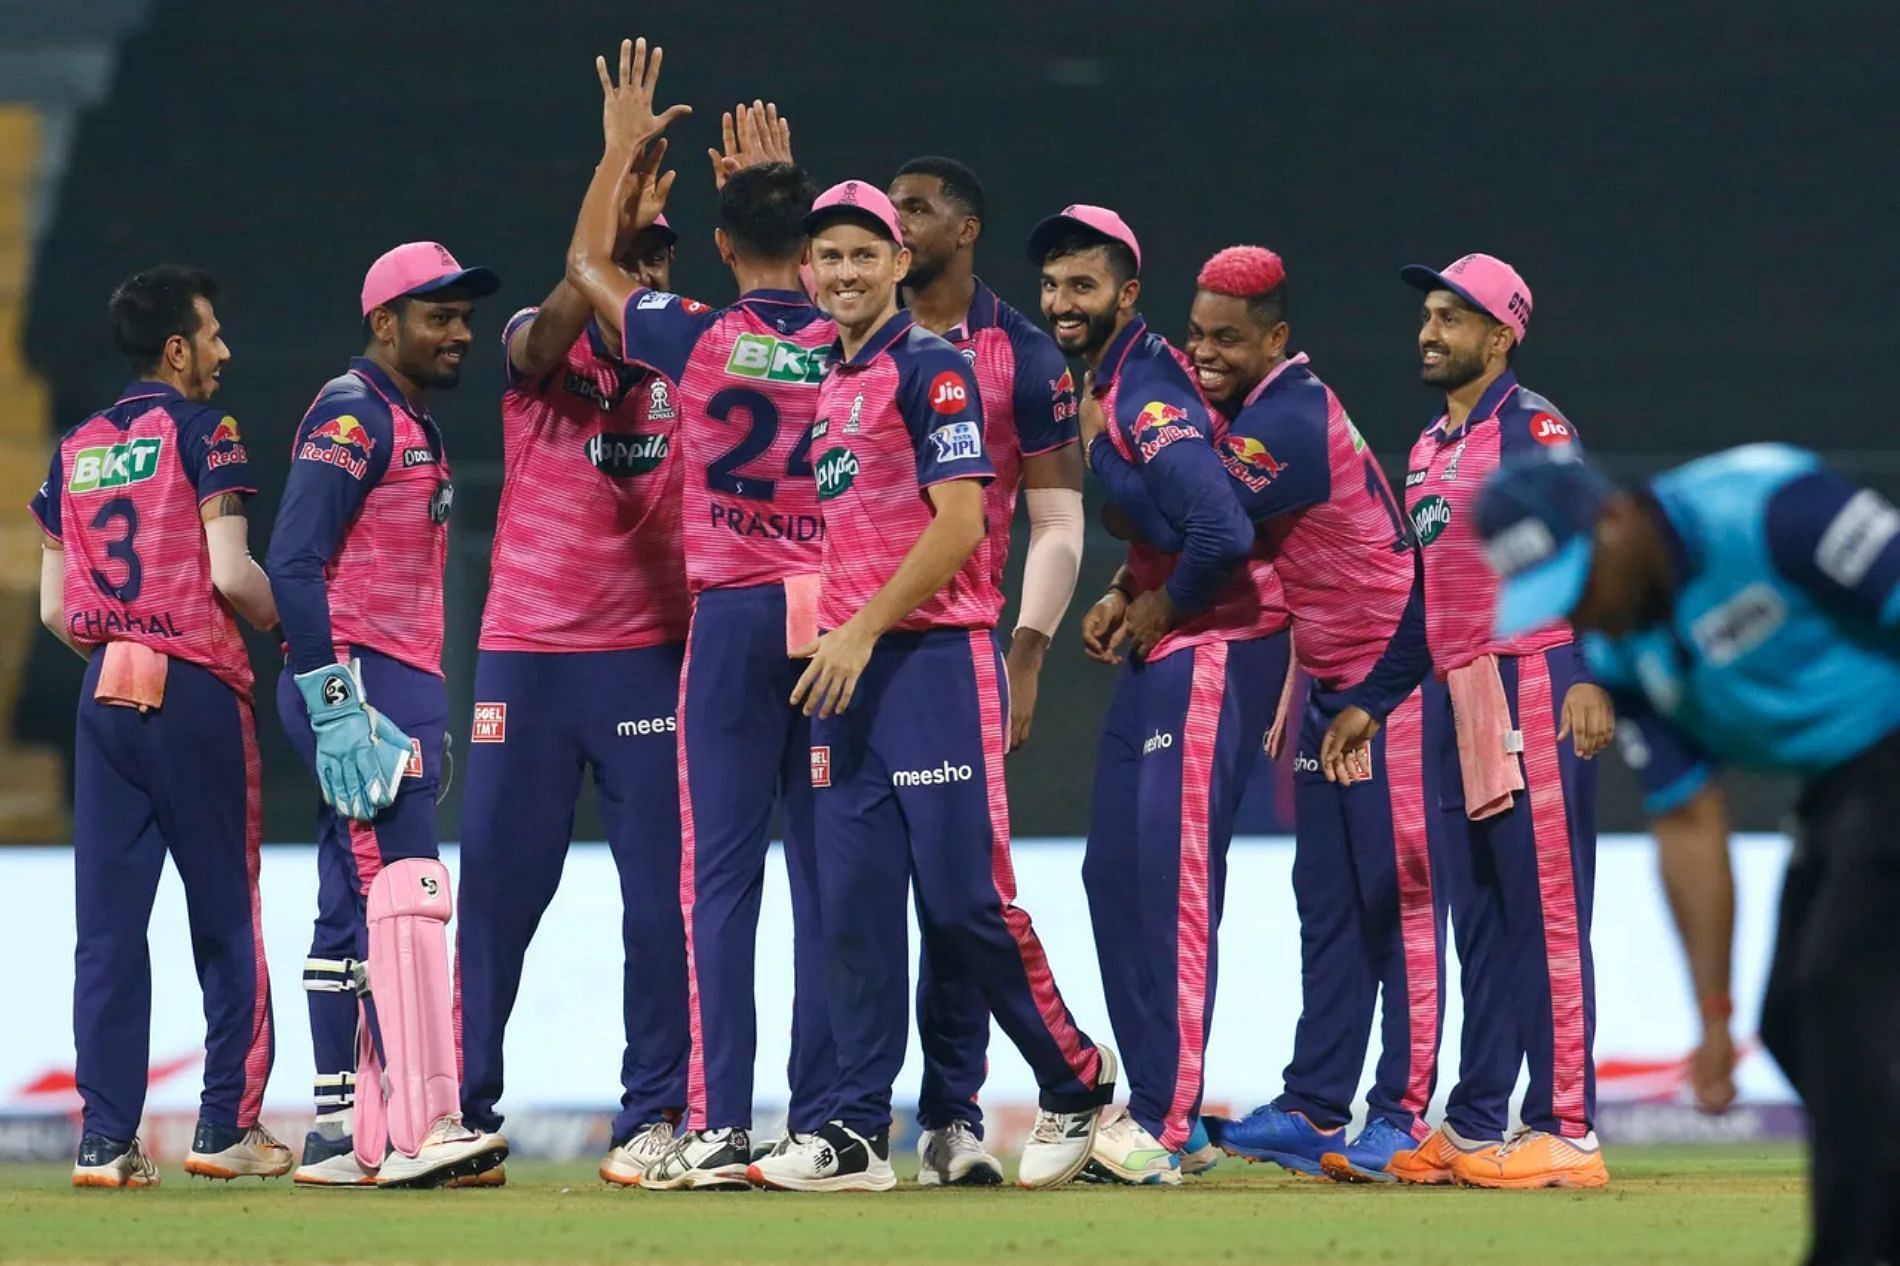 RR players celebrate a wicket. Pic: IPLT20.COM